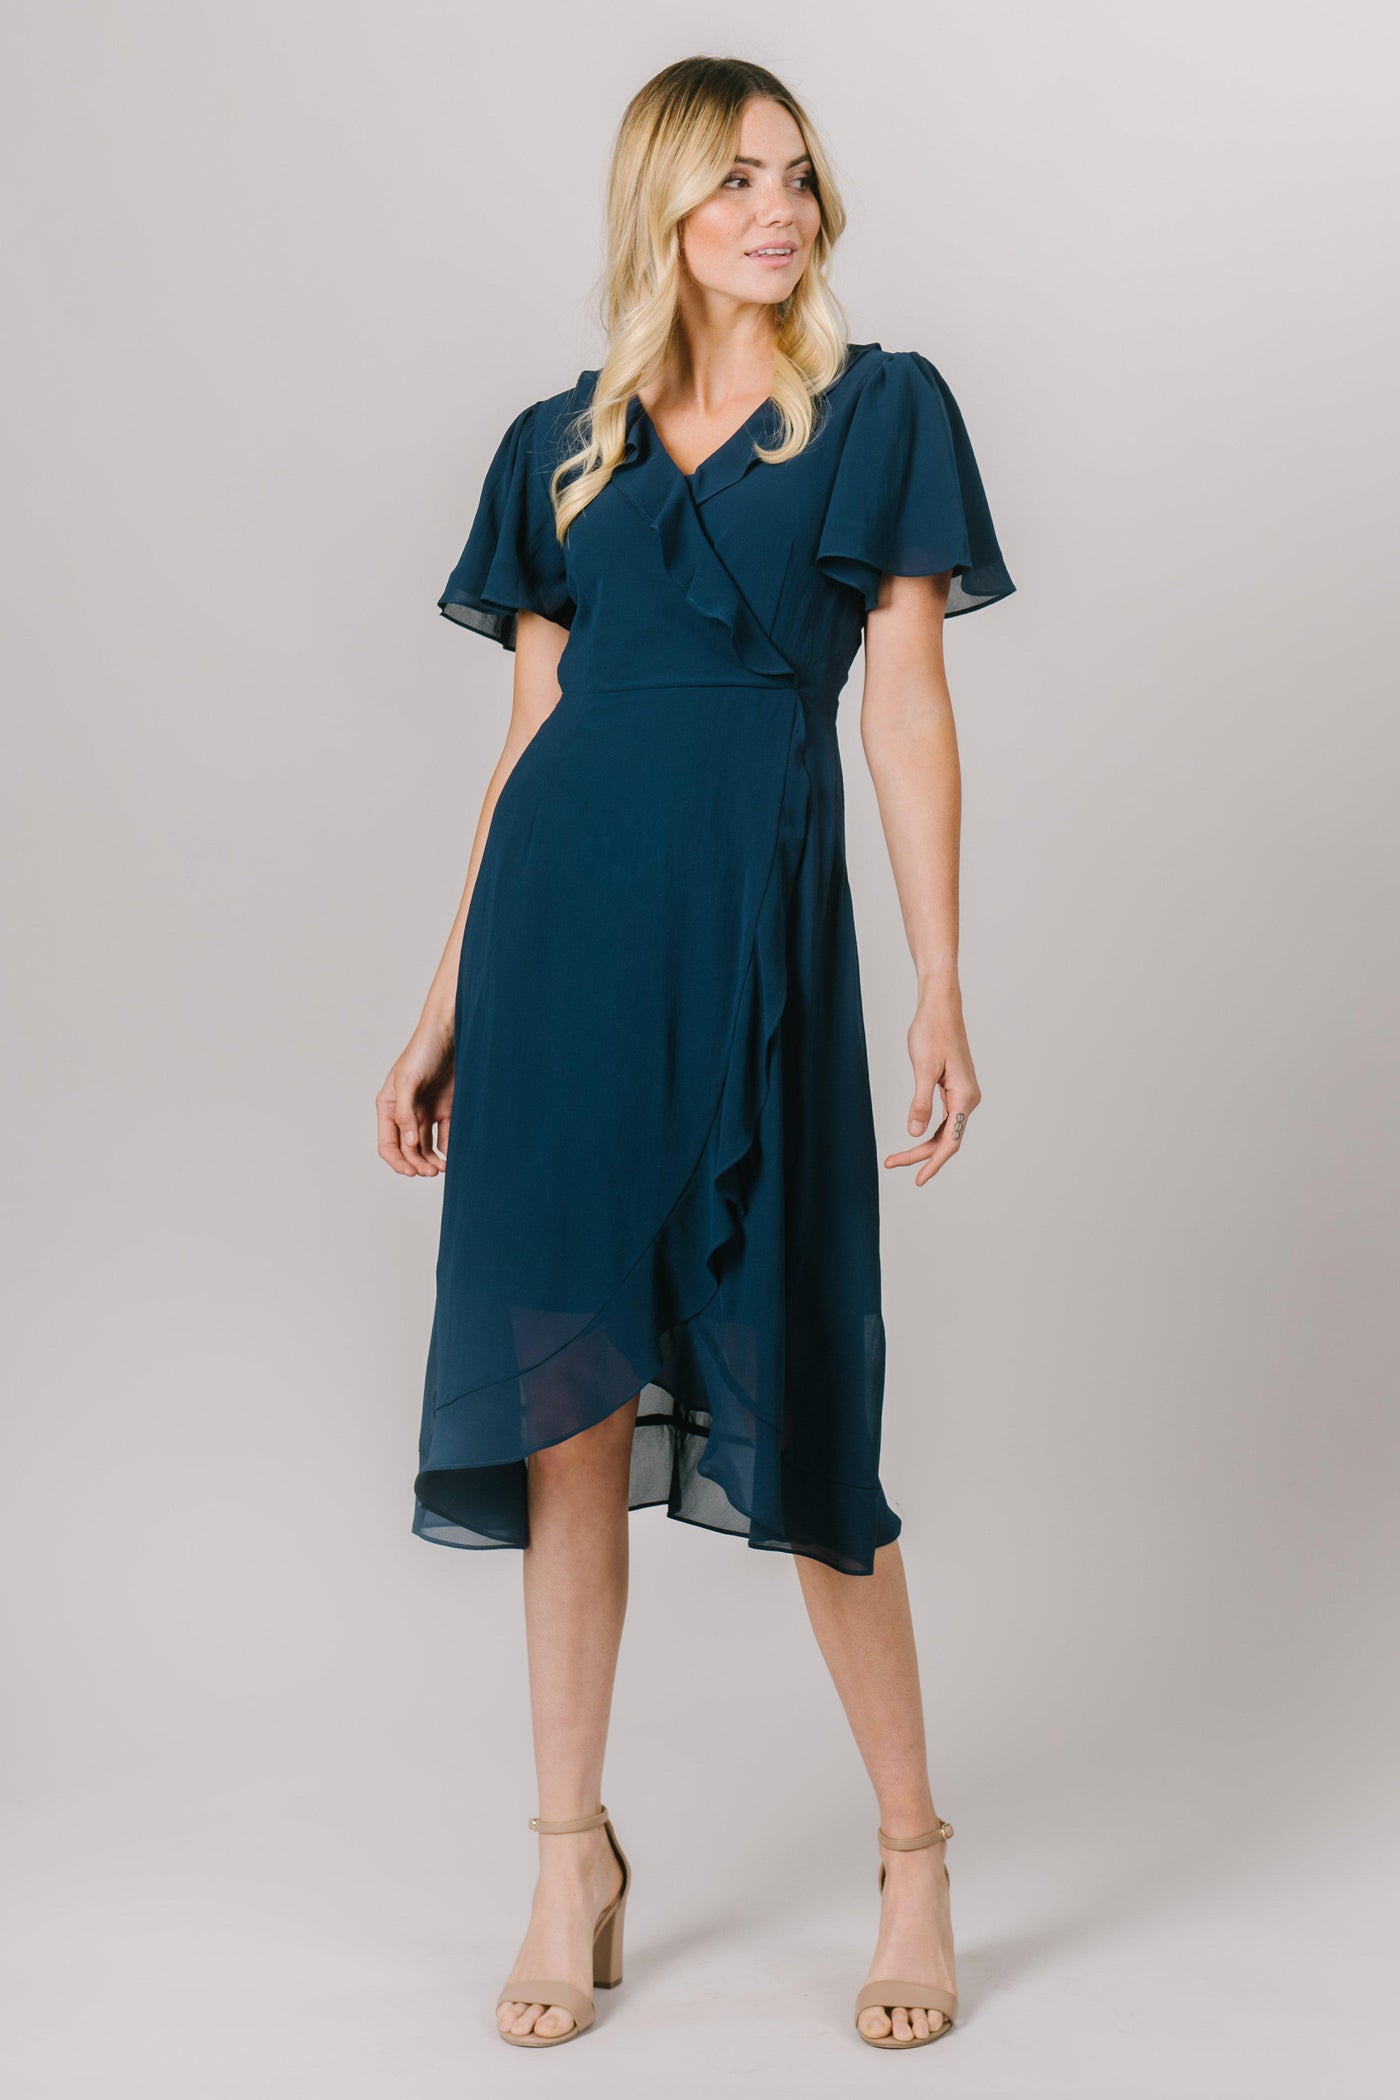 This fun modest dress is perfect for your everyday moments! It features a flattering fit and ruffles following the wrap shape! The sleeves also add a touch of fun!  Also available in Burgundy. Modest Dresses - Modest Clothing - Everyday Modest Dresses - Bridesmaid Modest Dresses. 